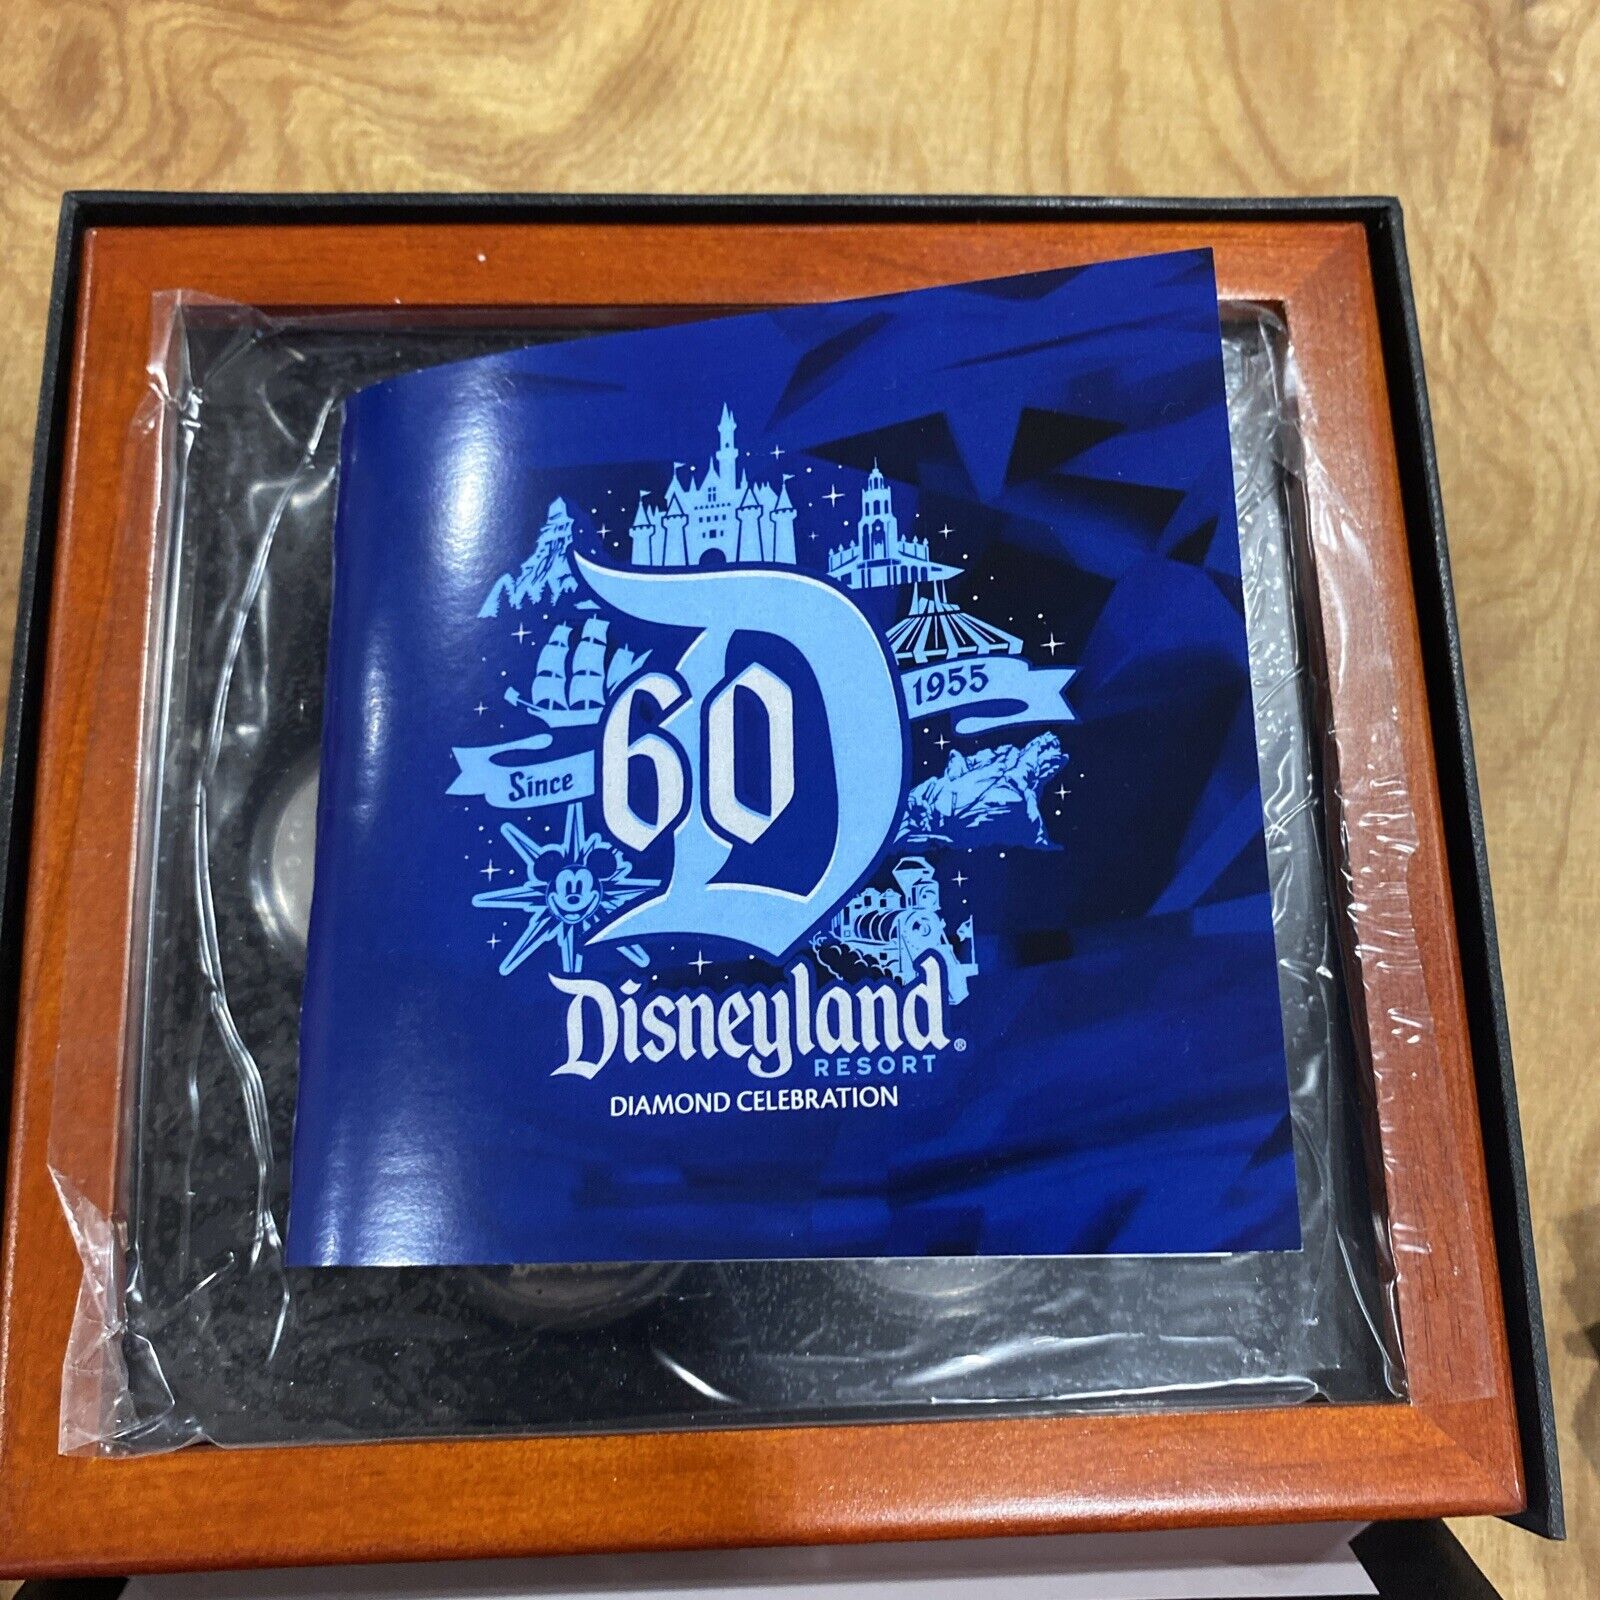 Disneyland 60th Anniversary Silver Plated Medallions Box Set of 7 LE 1955